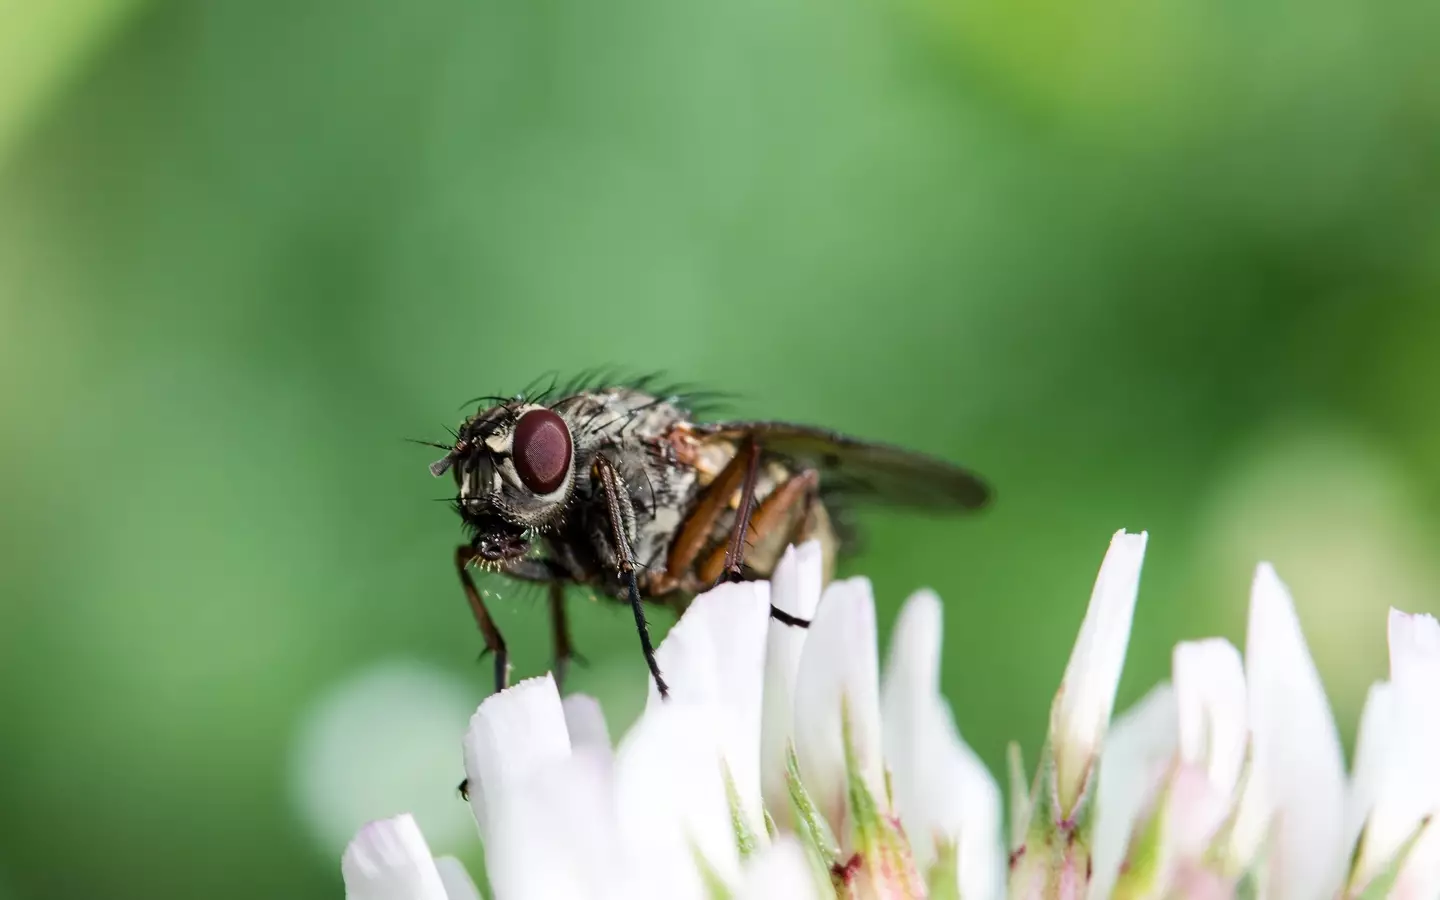 You may not have given much thought to how flies eat.